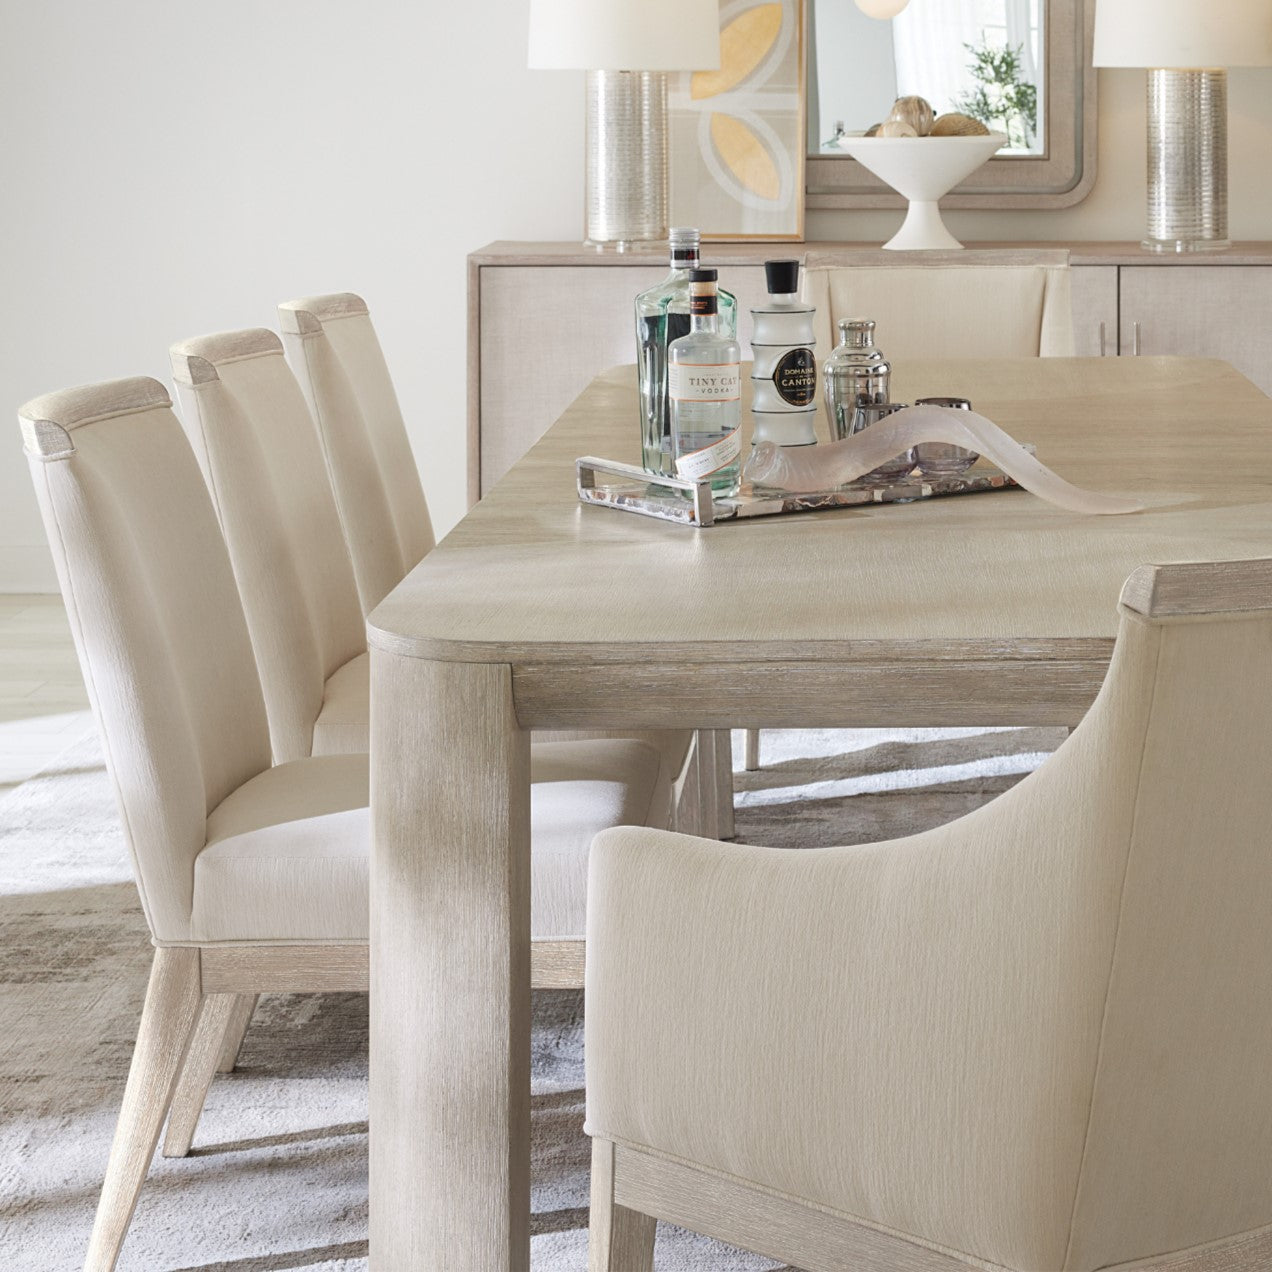 Hooker Furniture Modern Mood Collection dining table and dining chairs